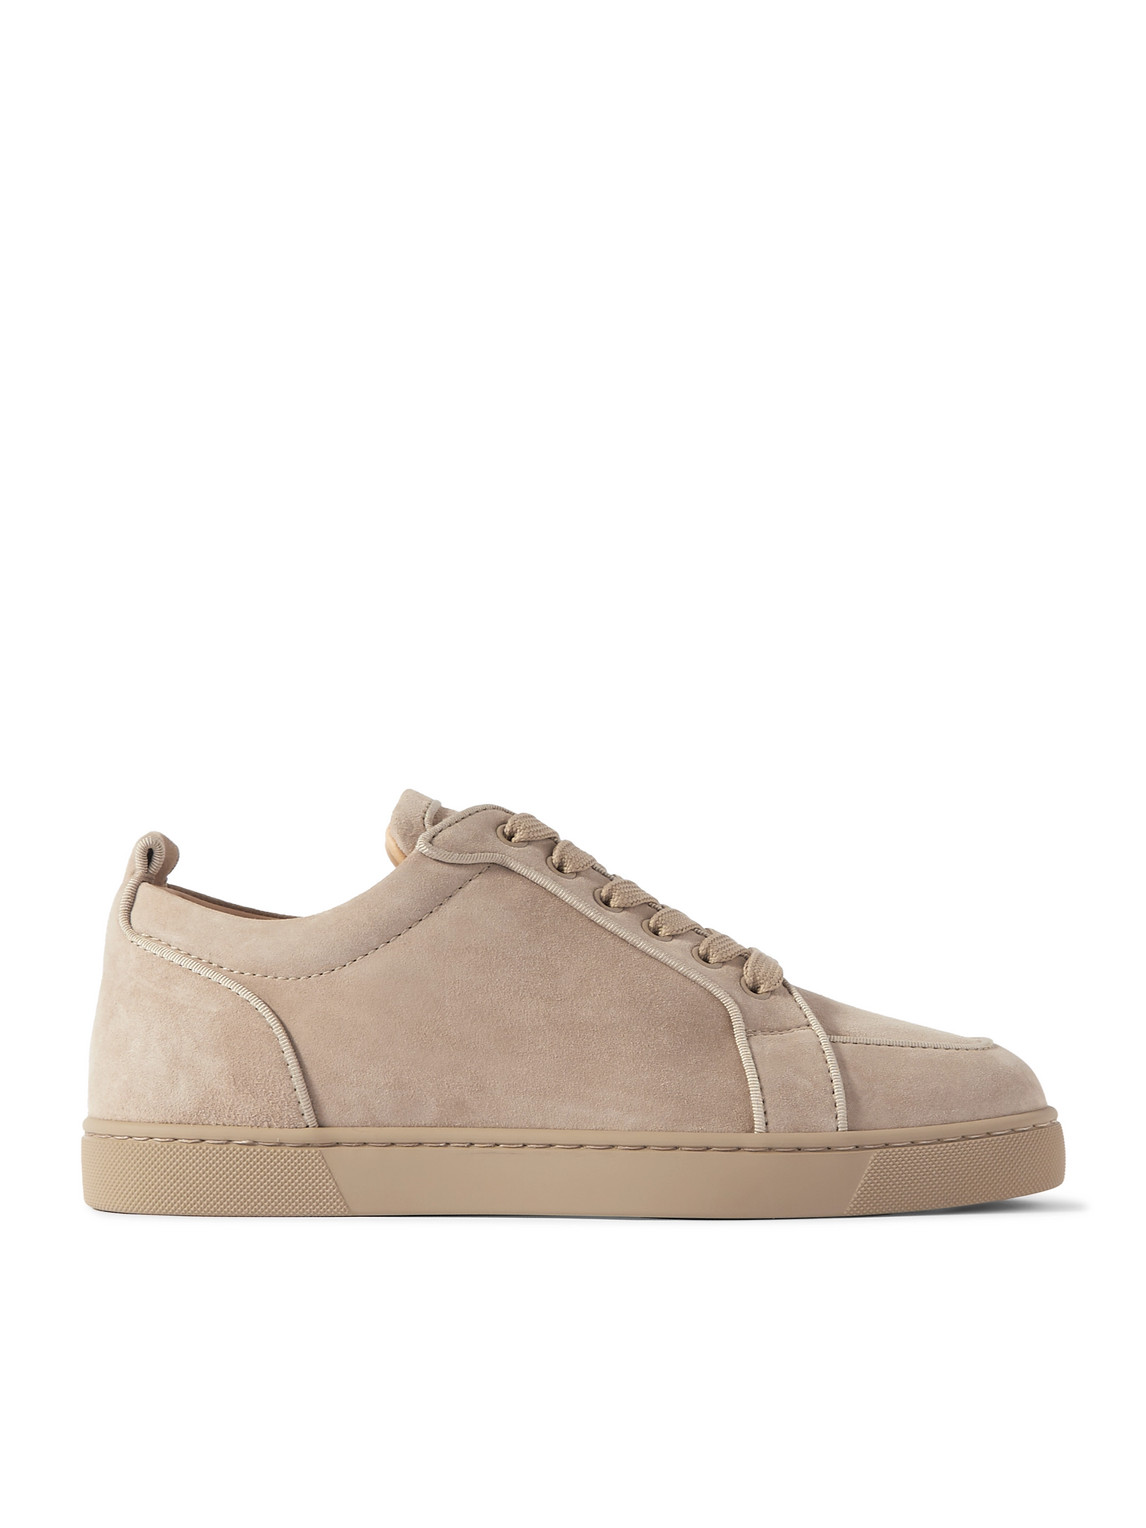 Christian Louboutin Rantulow Suede Trainers In Neutrals